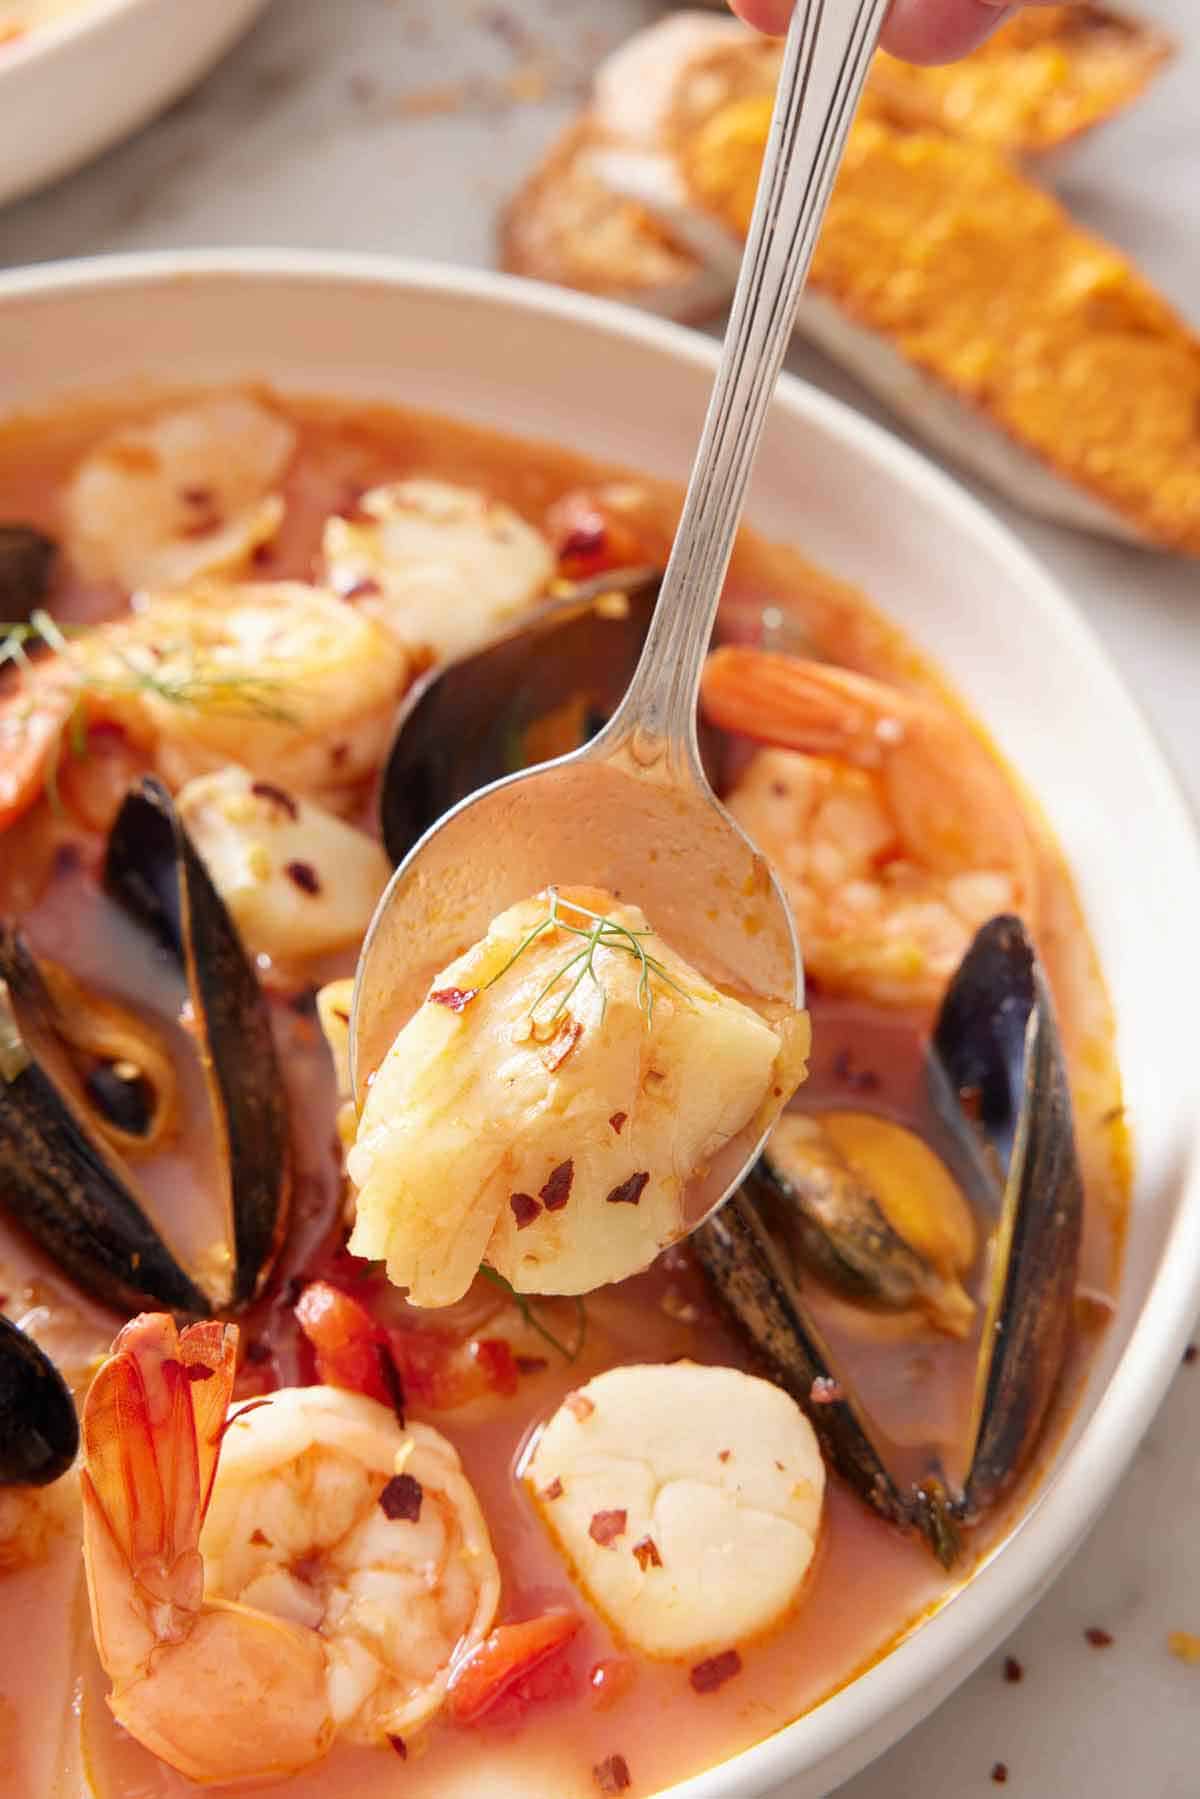 A spoonful lifting up shrimp from a bowl of bouillabaisse.